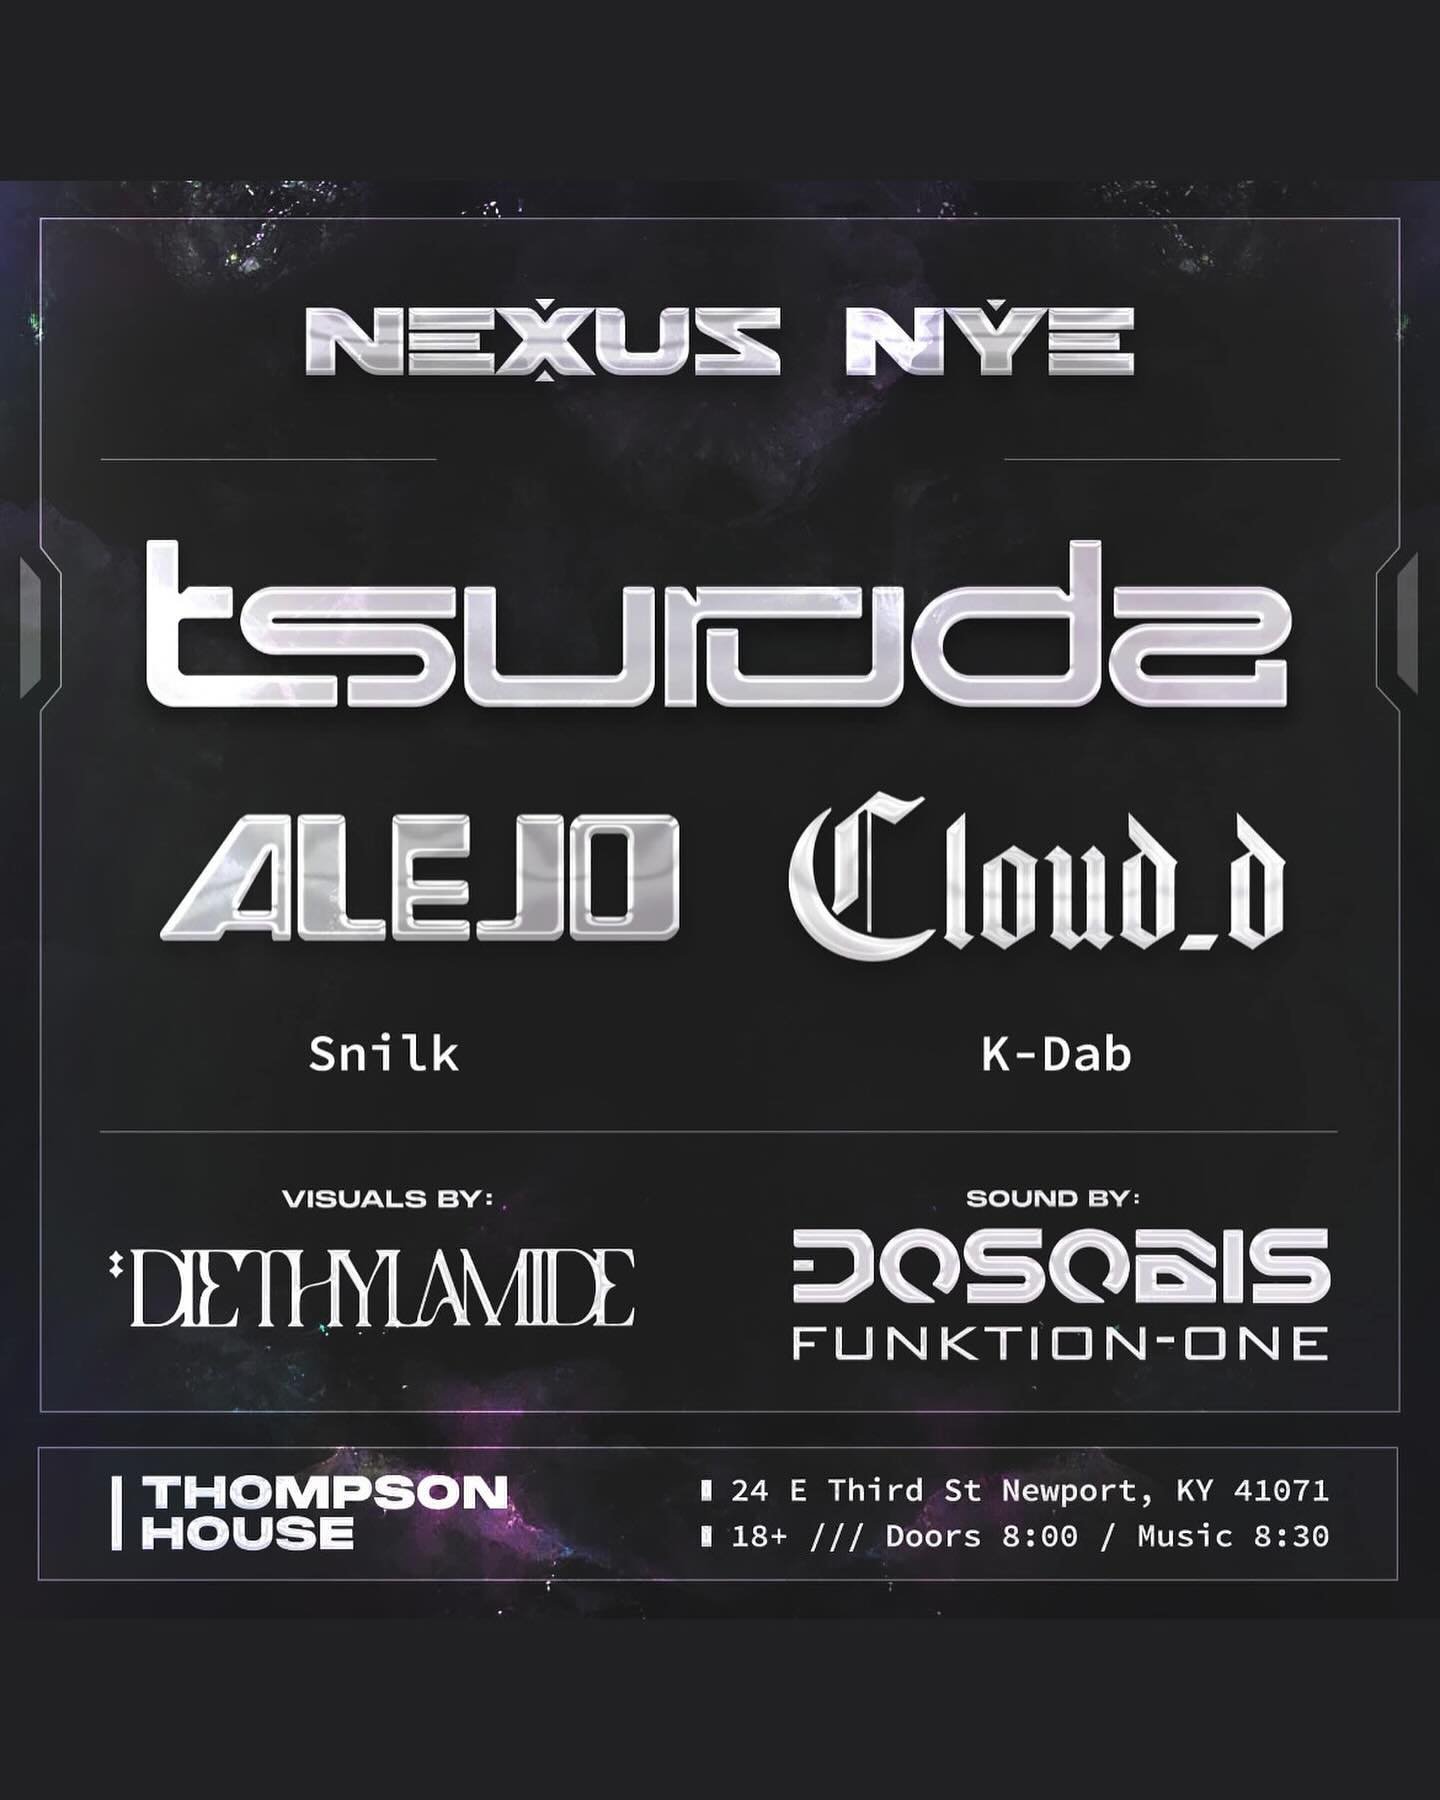 🎉🎉 We have a great NYE In Store for all who attend this show tonight! Swipe for Set Times!